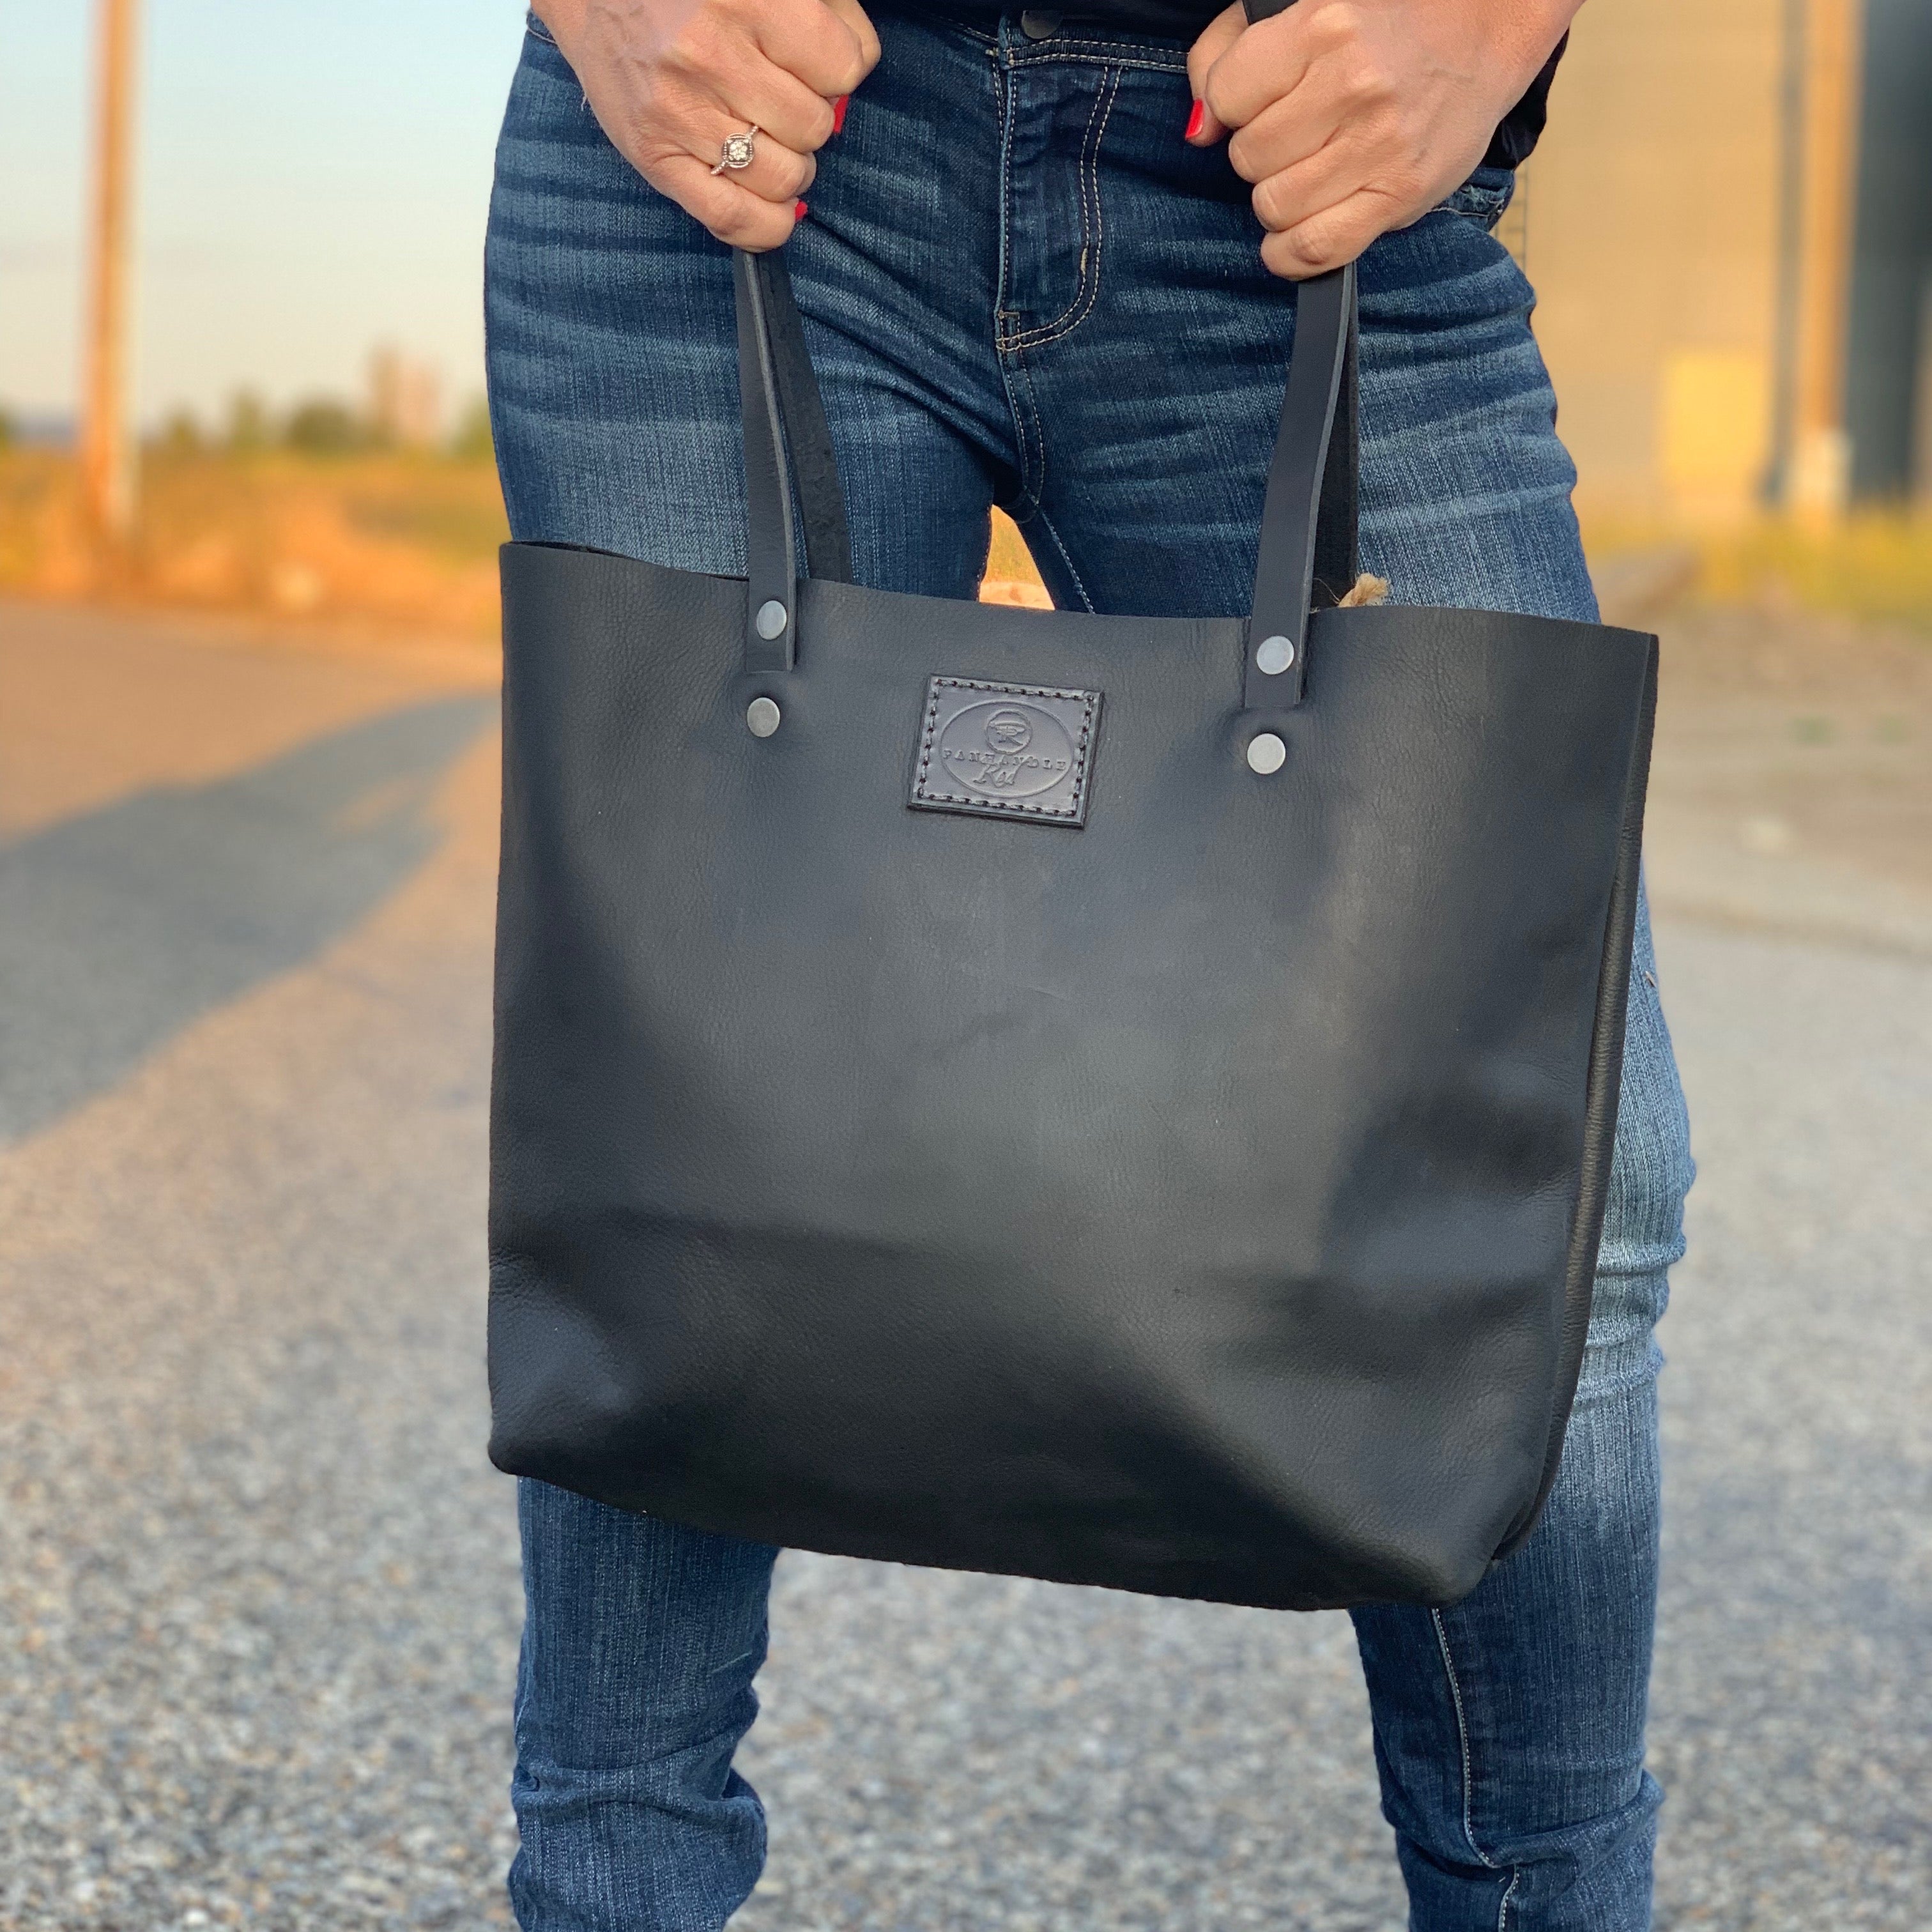 Grey Leather Tote Bag by Panhandle Red Leather Company North Idaho Gift Shop